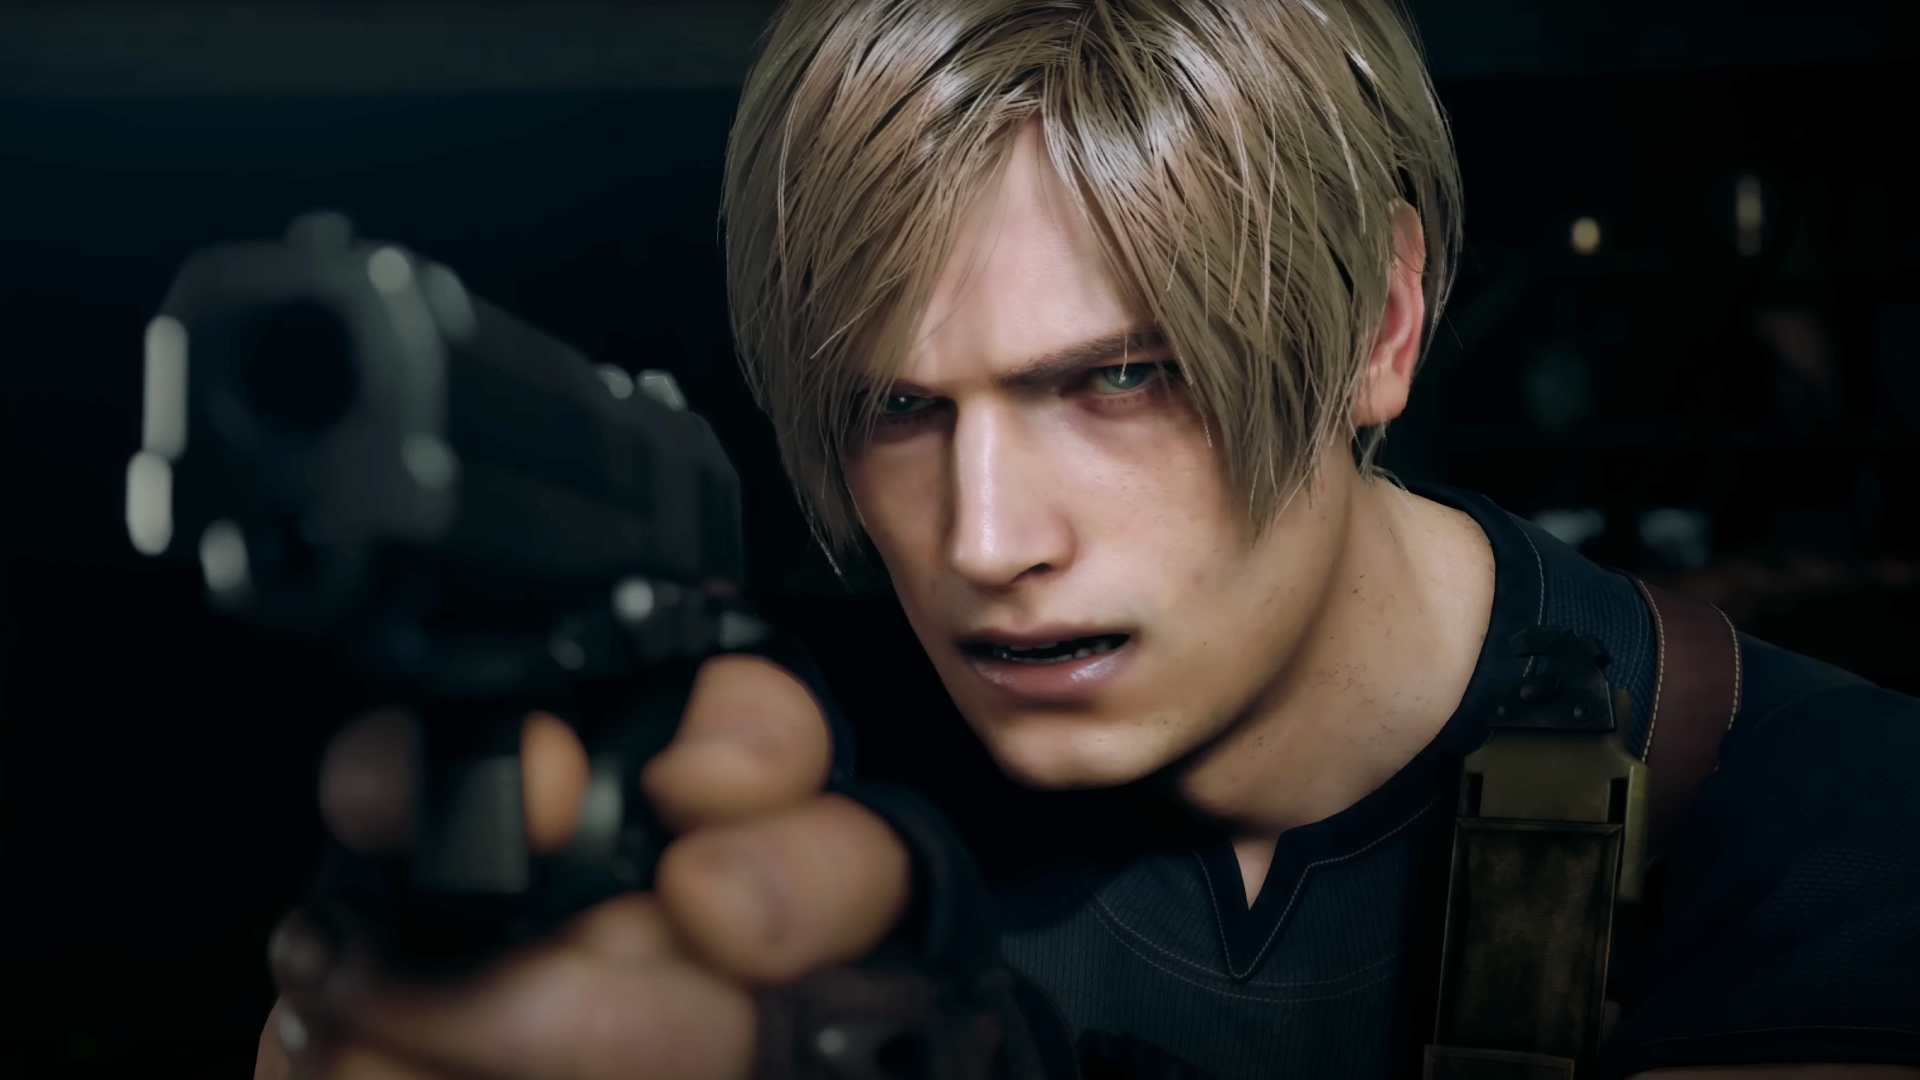 Leon from Resident Evil 4 Remake aiming a pistol